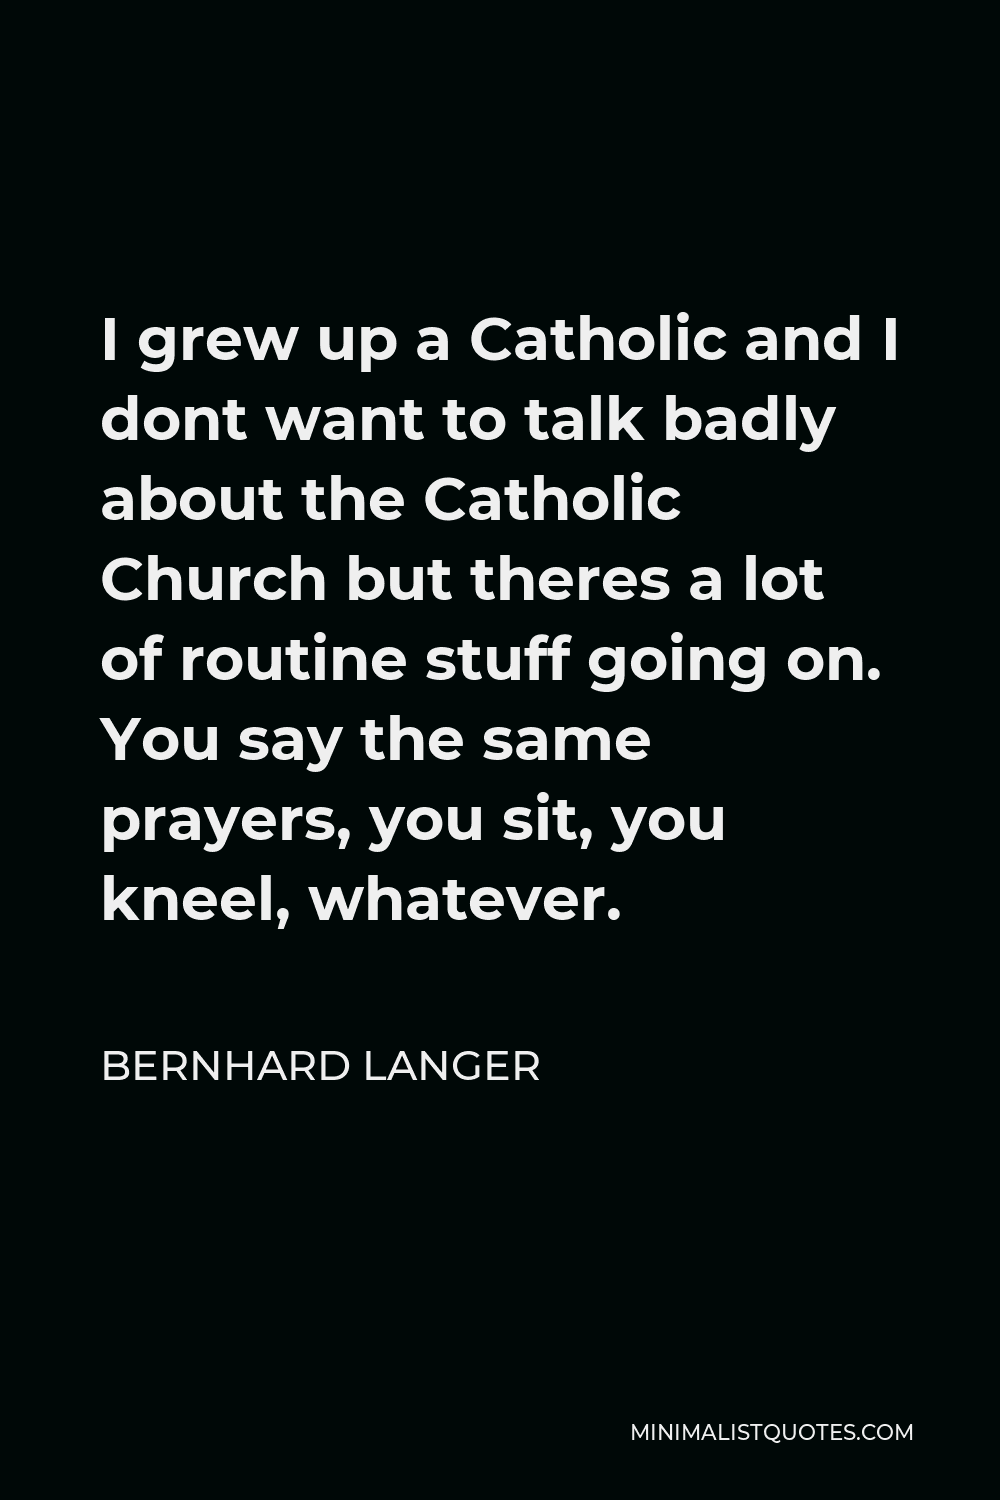 Bernhard Langer Quote - I grew up a Catholic and I dont want to talk badly about the Catholic Church but theres a lot of routine stuff going on. You say the same prayers, you sit, you kneel, whatever.